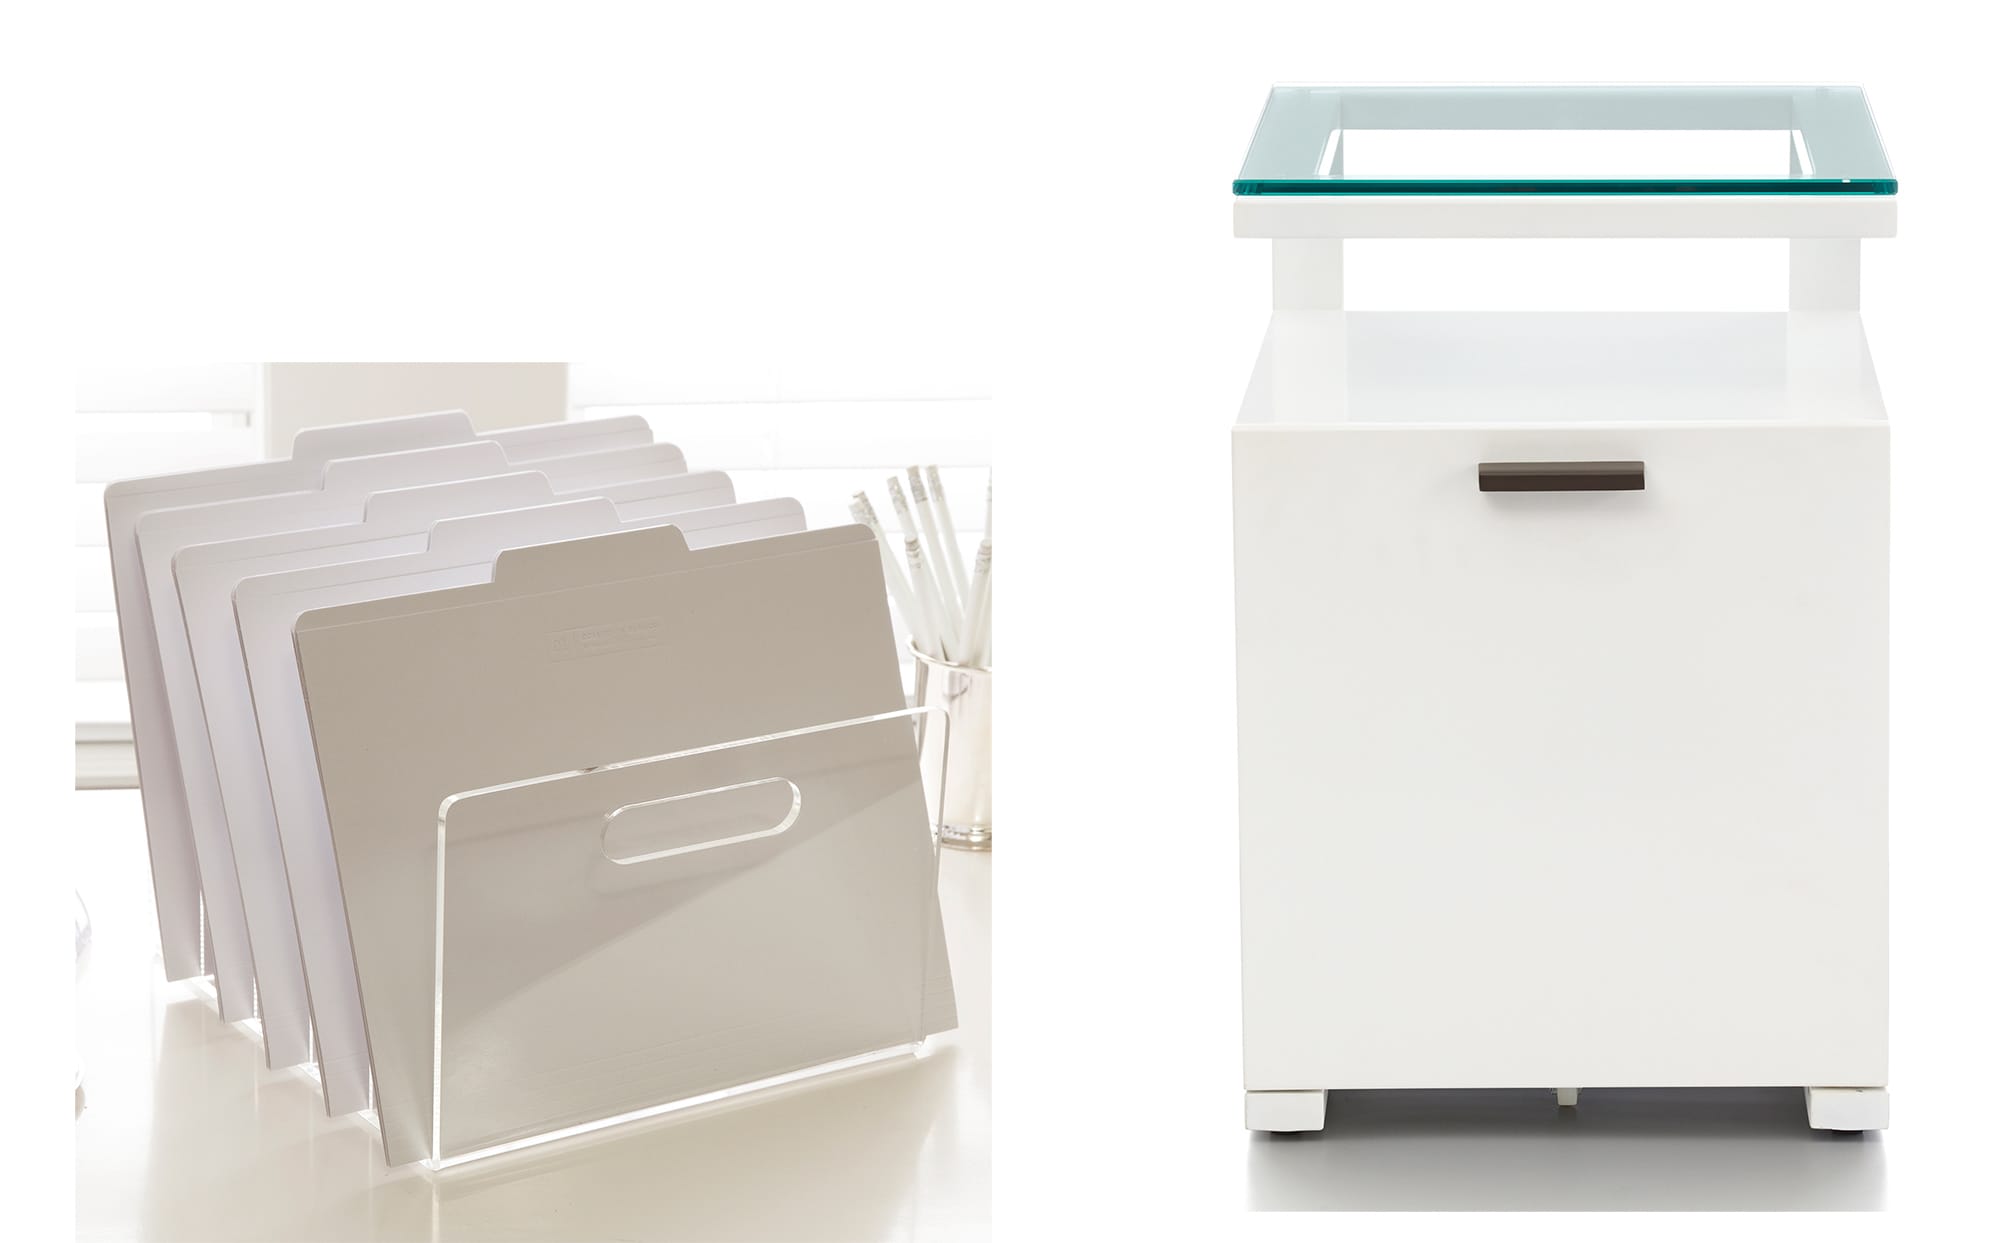 See Jane Work; Crate &amp; Barrel
Places to store papers in your home office: left, Russell + Hazel's acrylic collator, available at See Jane Work; the Pilsen Salt Filing Cabinet from Crate &amp; Barrel.